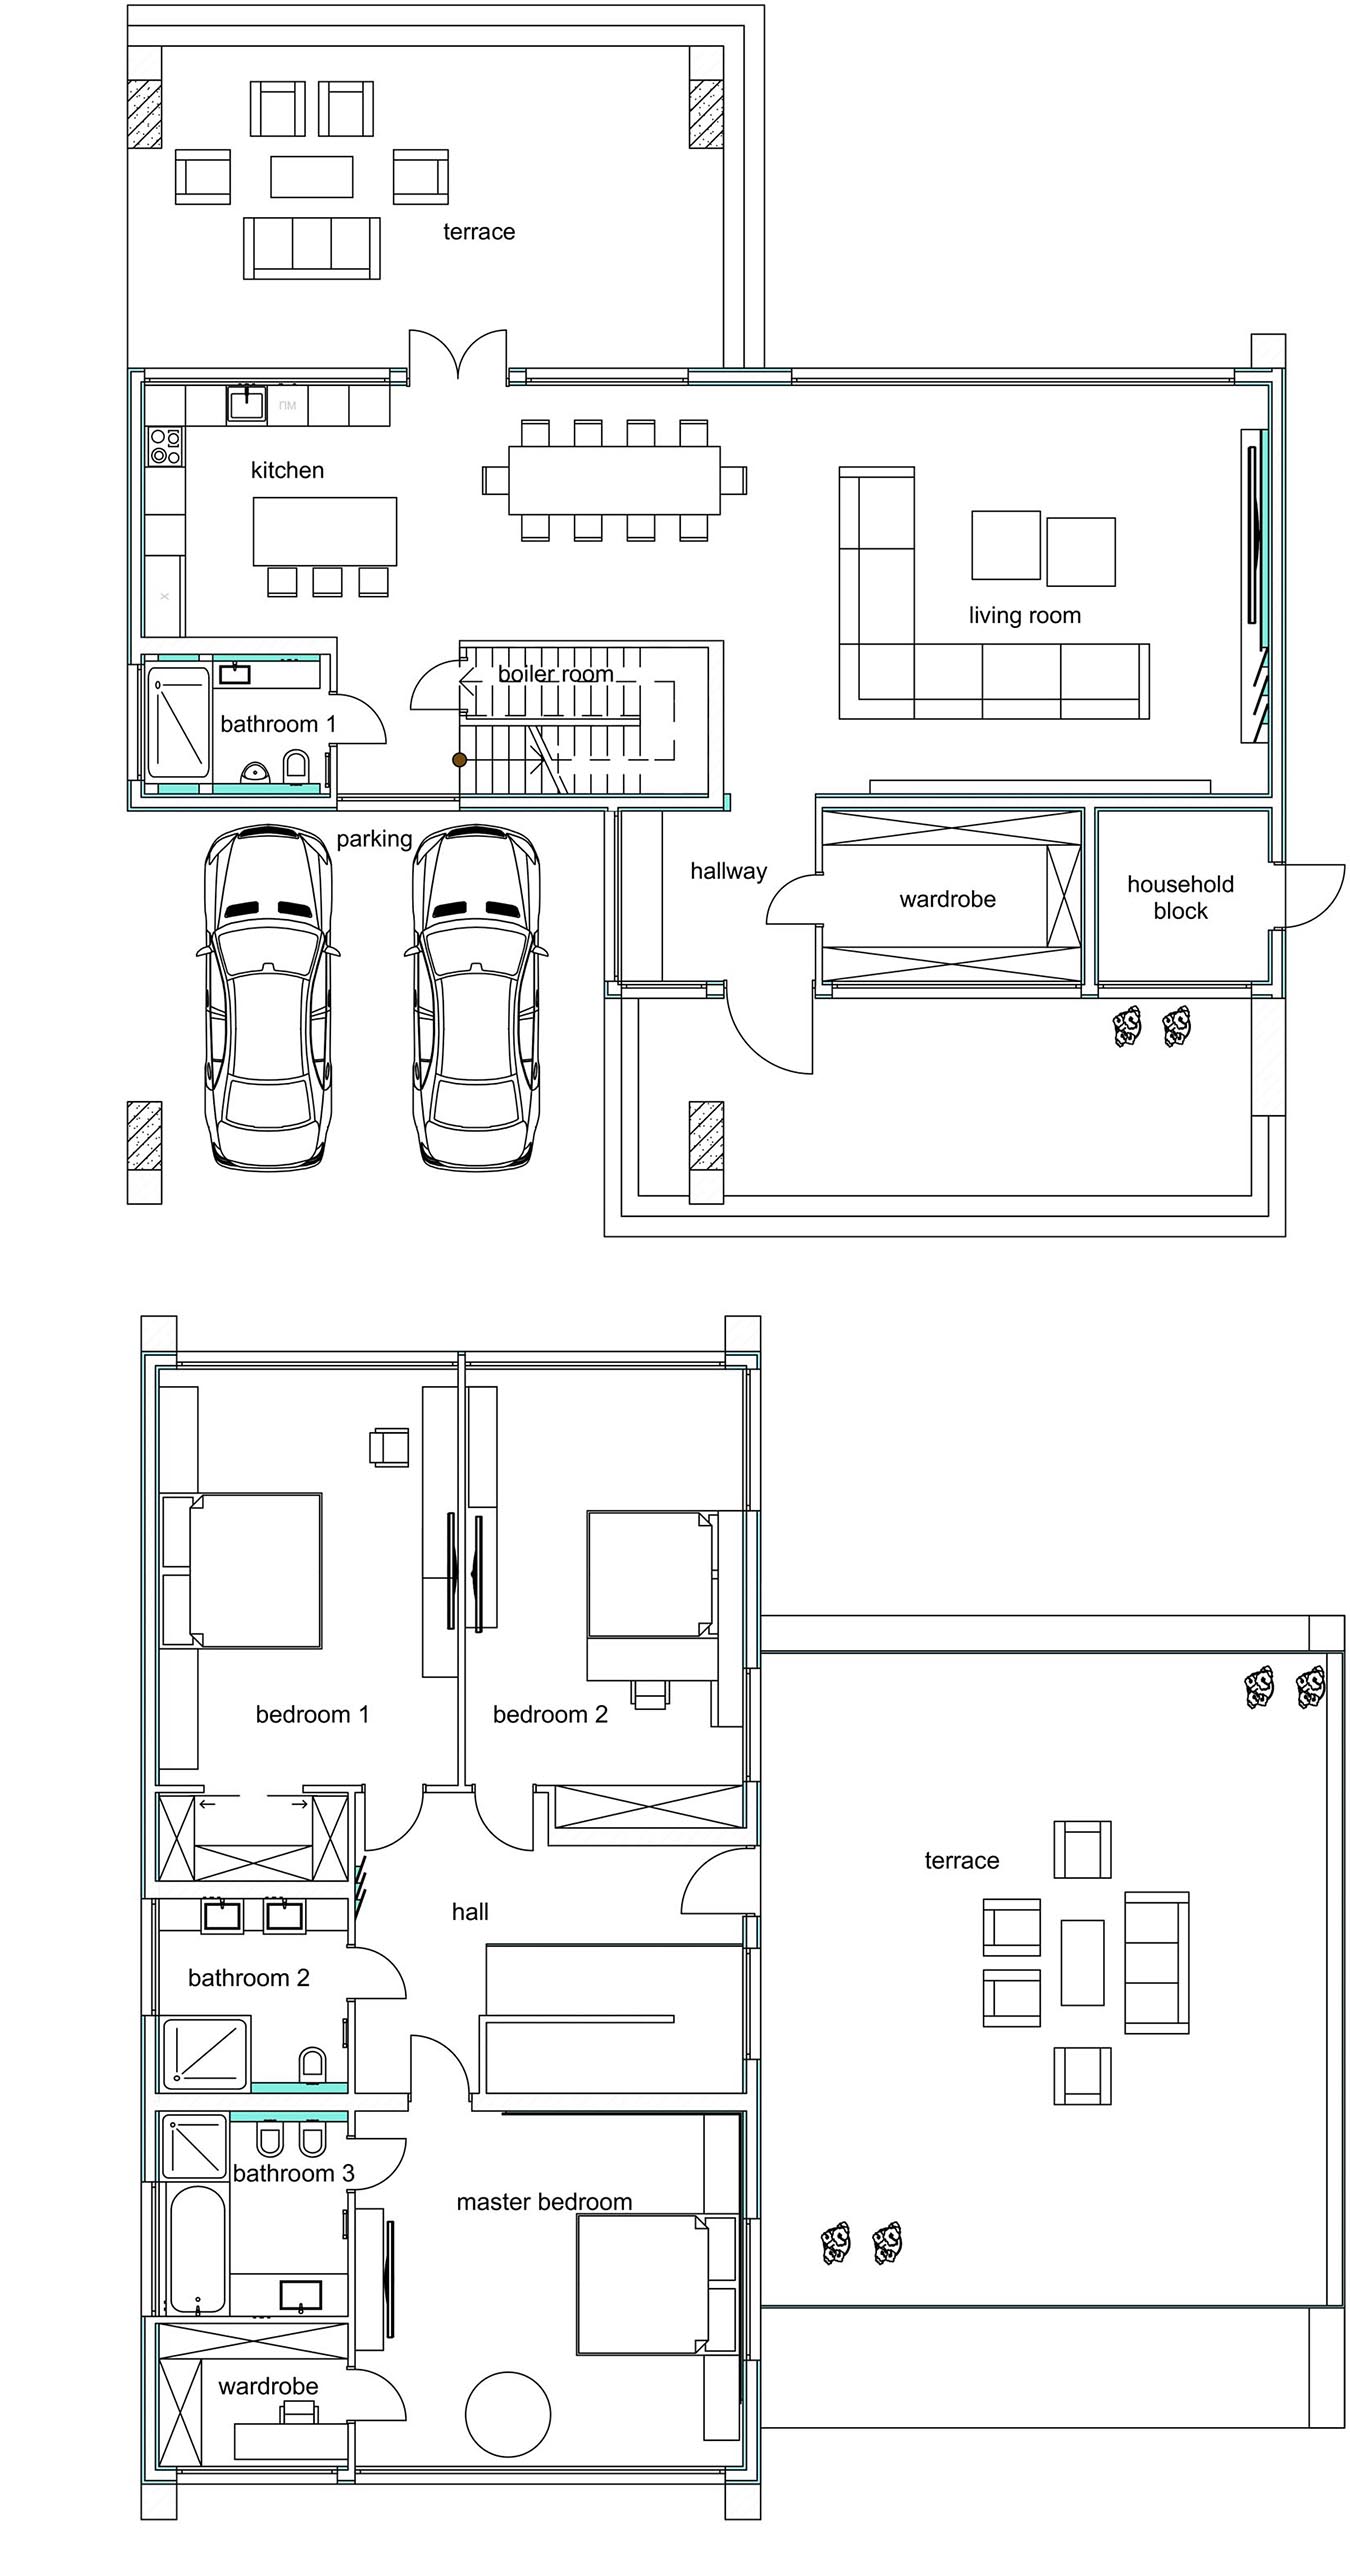 The floor plan of a modern to story home with three bedrooms.